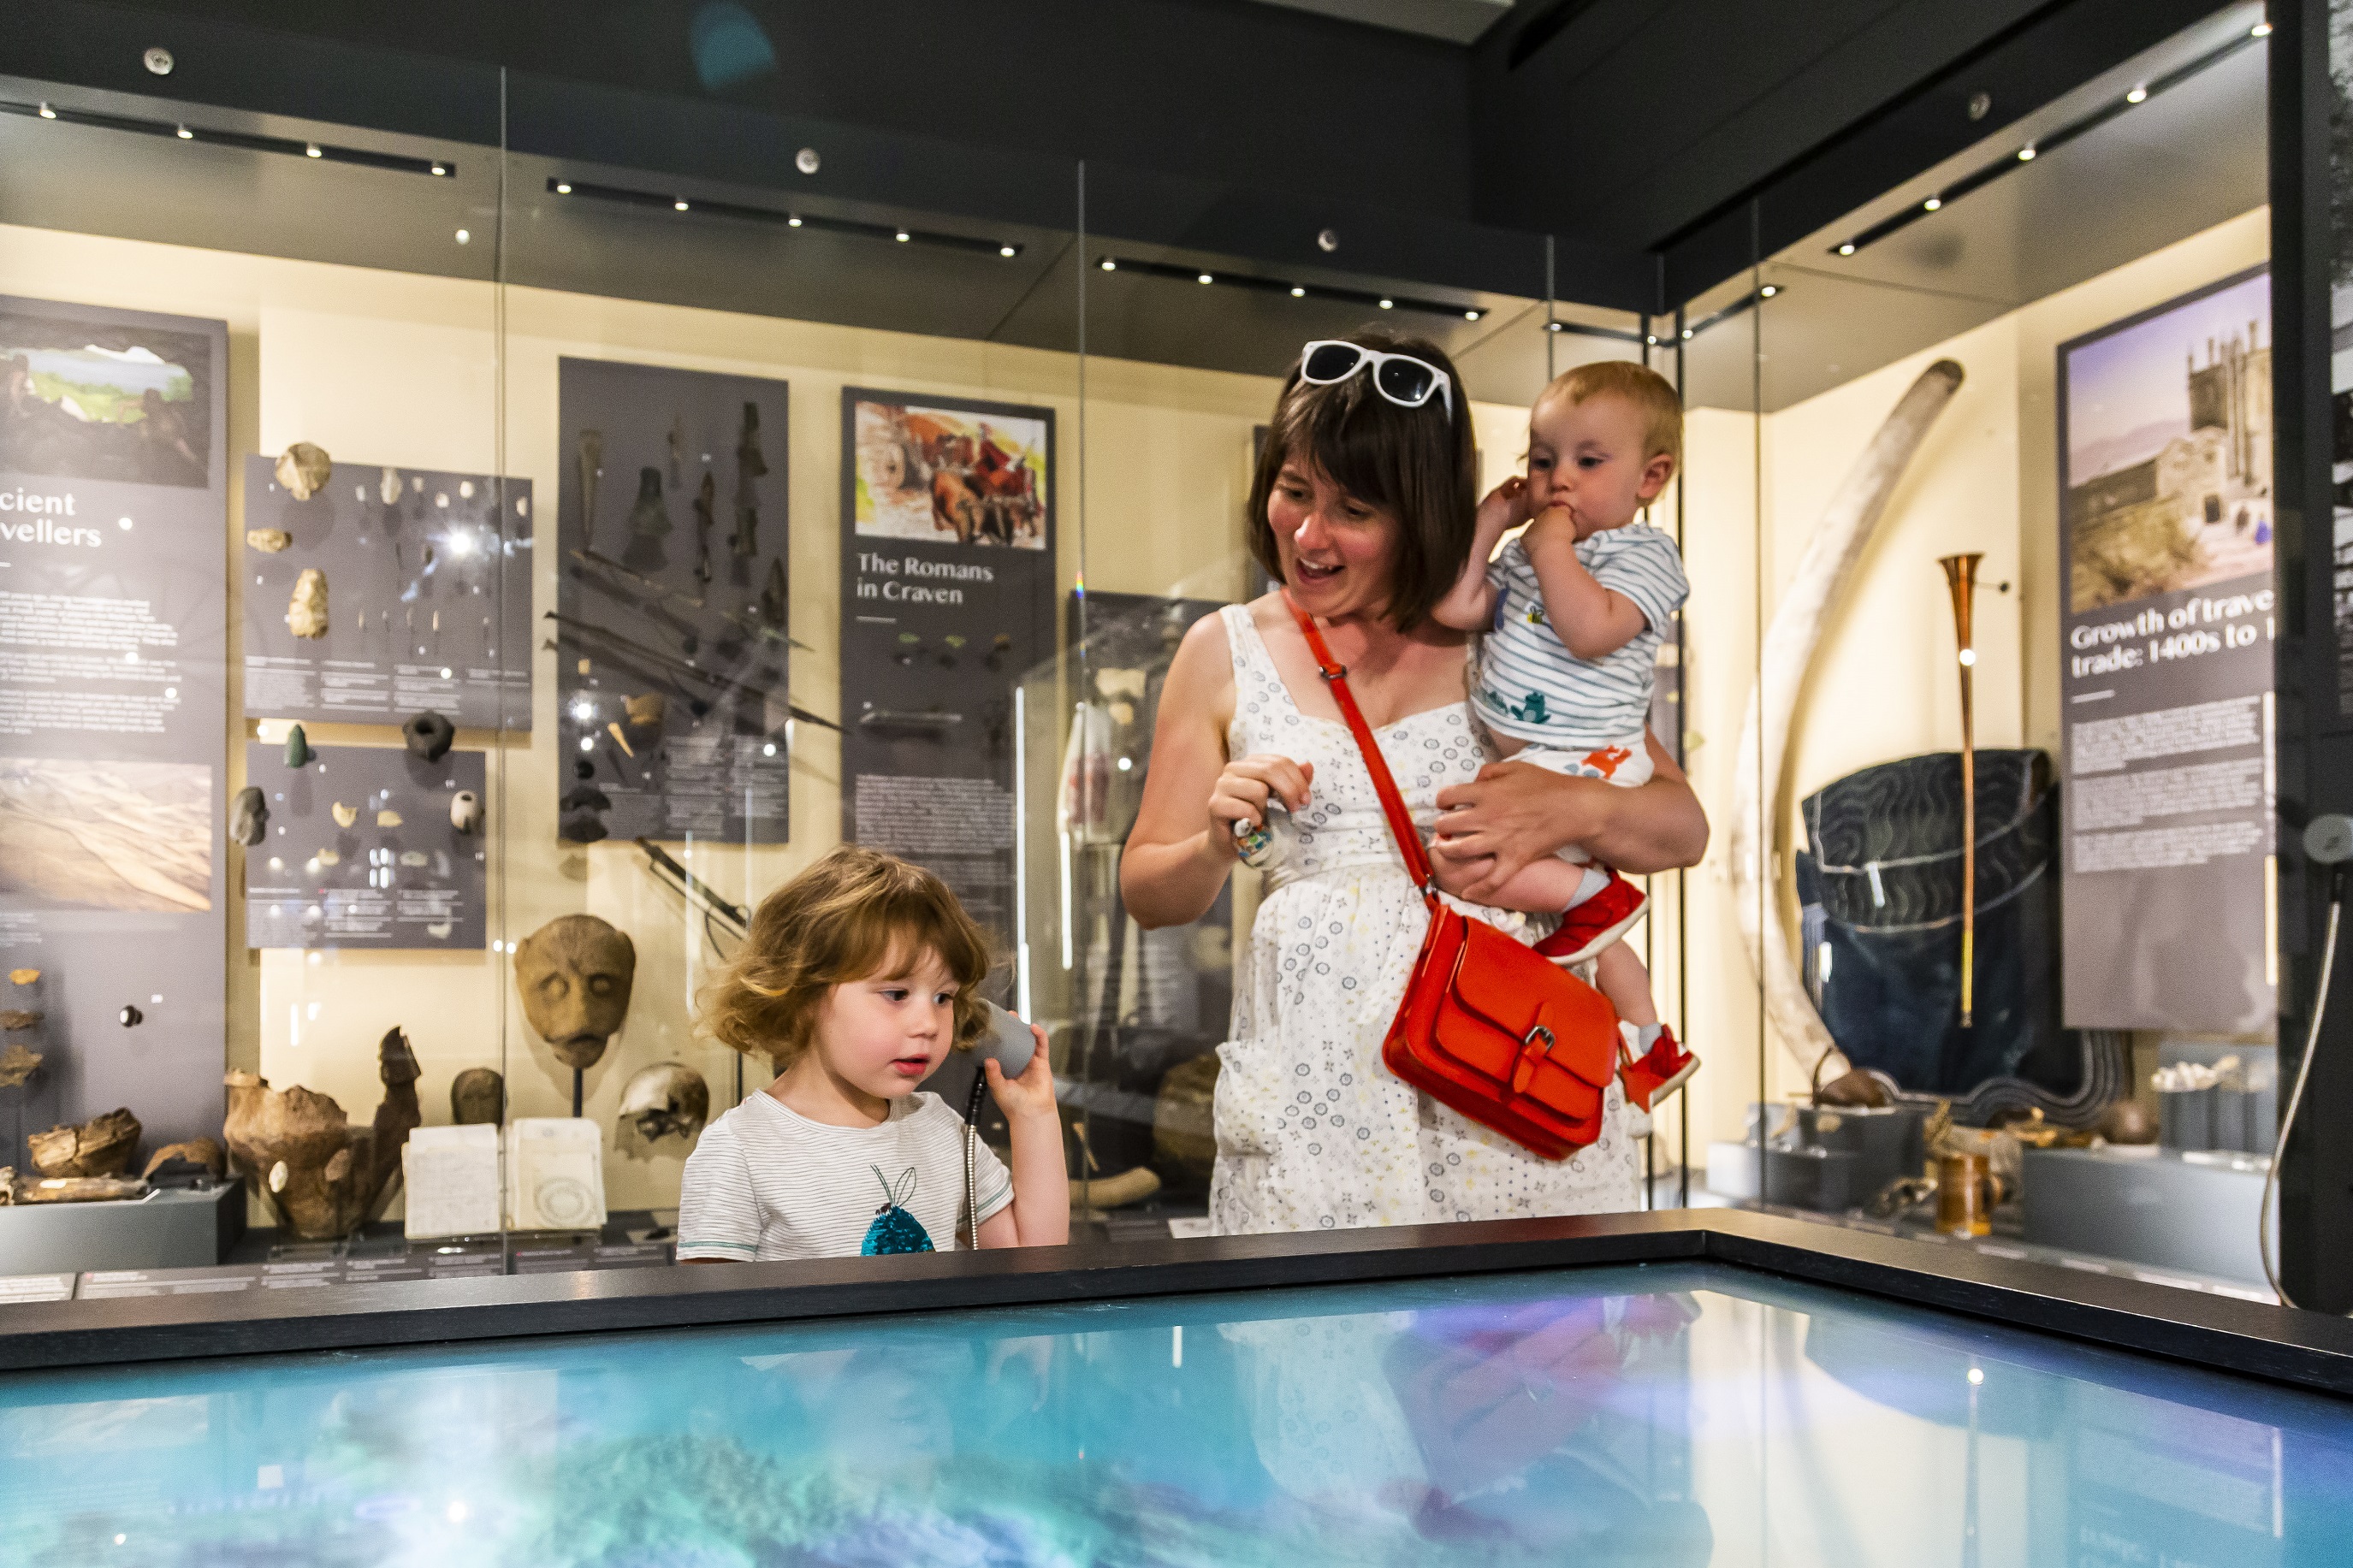 Craven Museum includes an exhibition gallery, historic concert hall, education, and community spaces which all work to enrich and expand the cultural experiences on offer. Photo credit: Art Fund